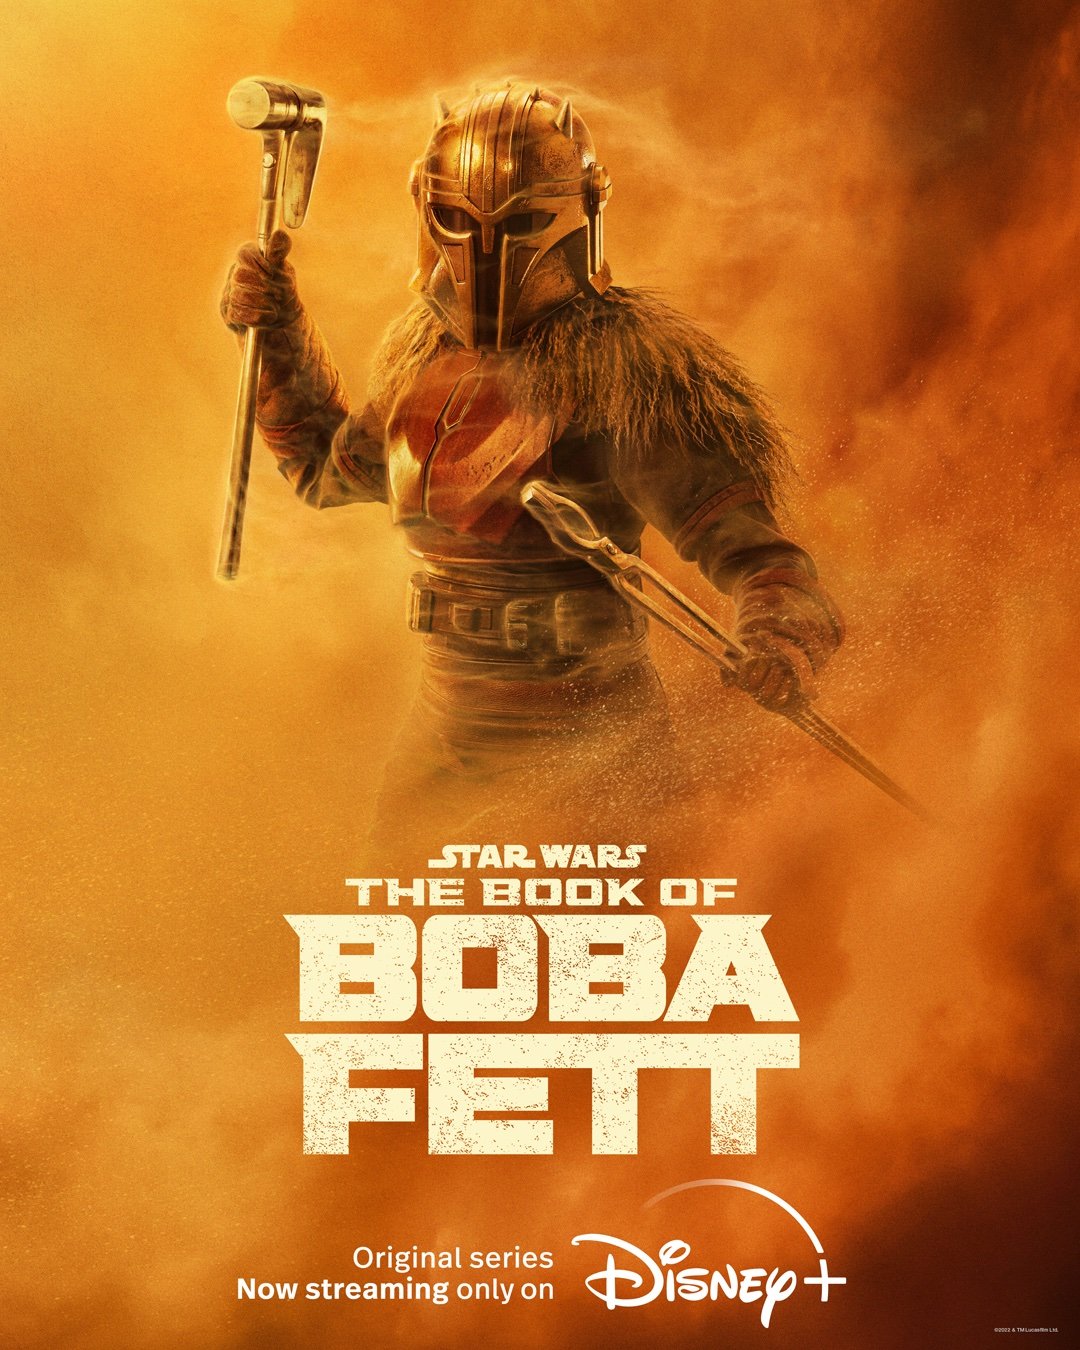 The Book of the Net Mandalorian Feature Return Star Character Posters Fett\' the 5 Wars Boba Chapter News - of